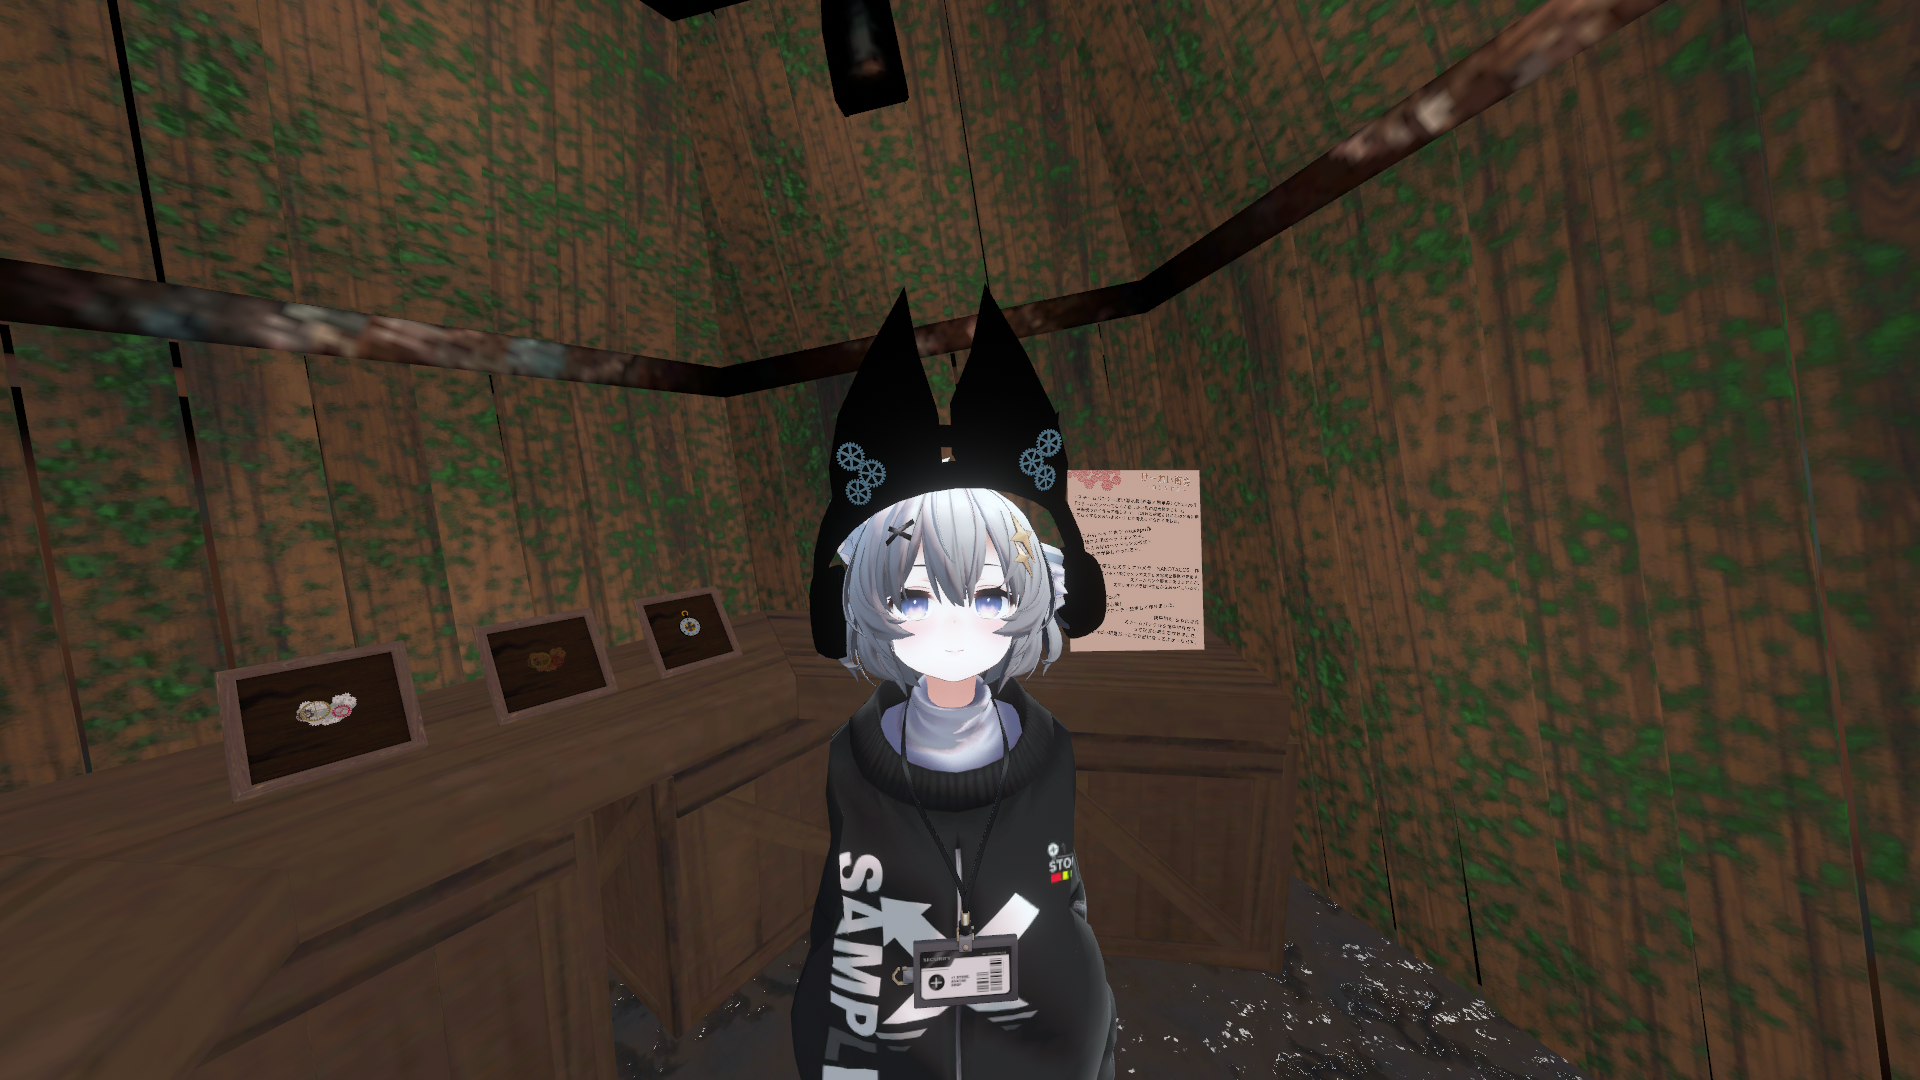 VRChat_1920x1080_2021-12-05_03-37-06.798.png